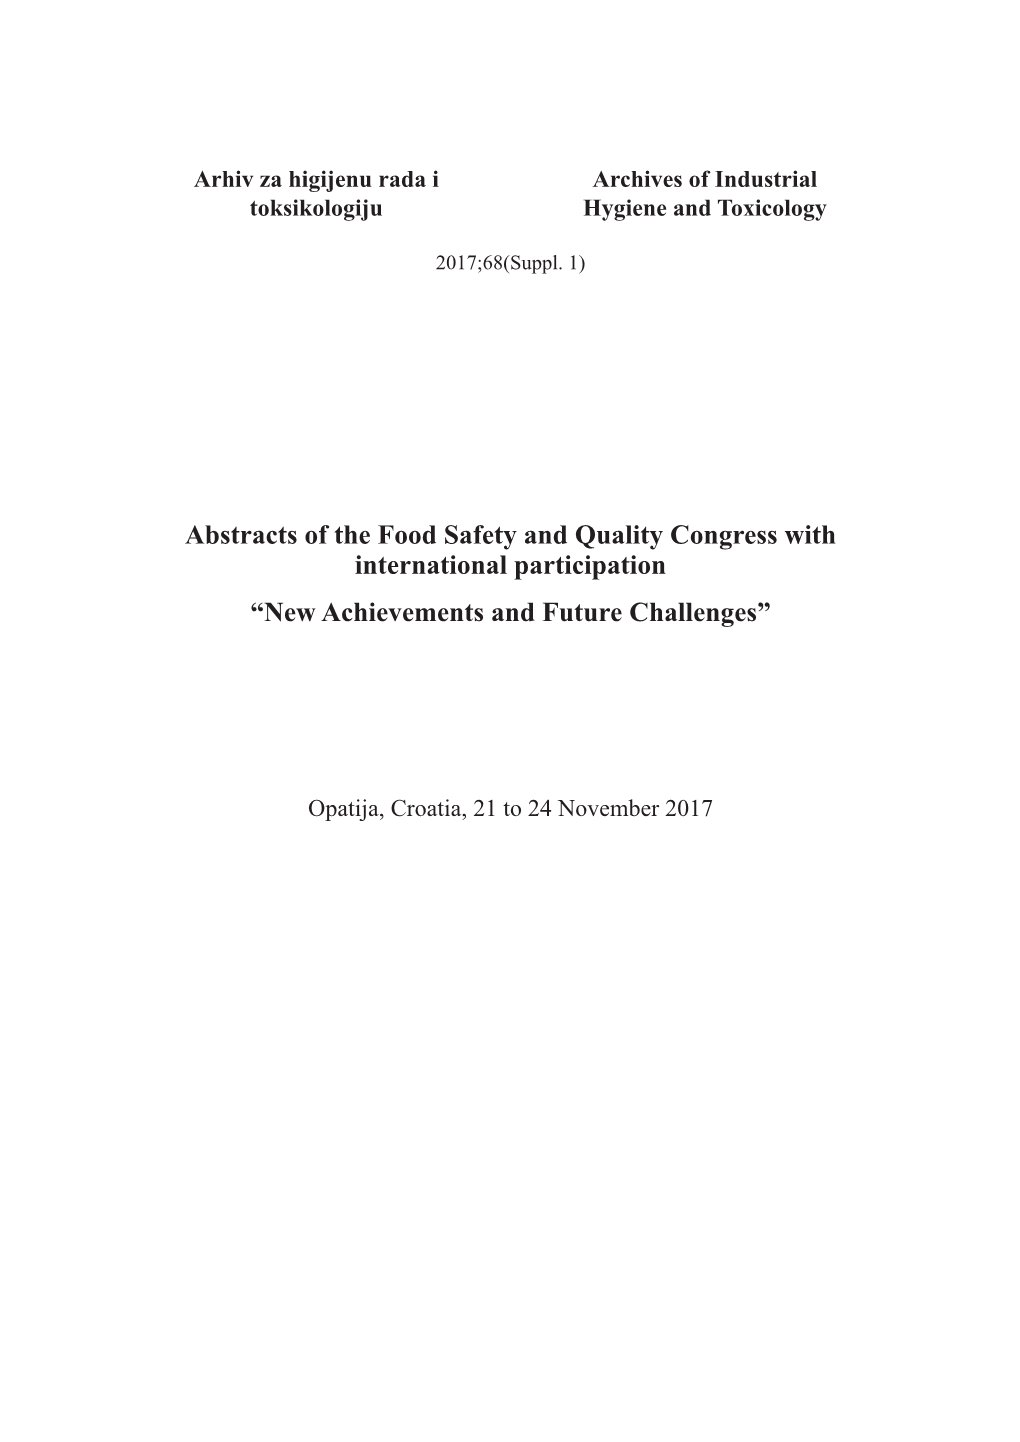 Abstracts of the Food Safety and Quality Congress with International Participation “New Achievements and Future Challenges”